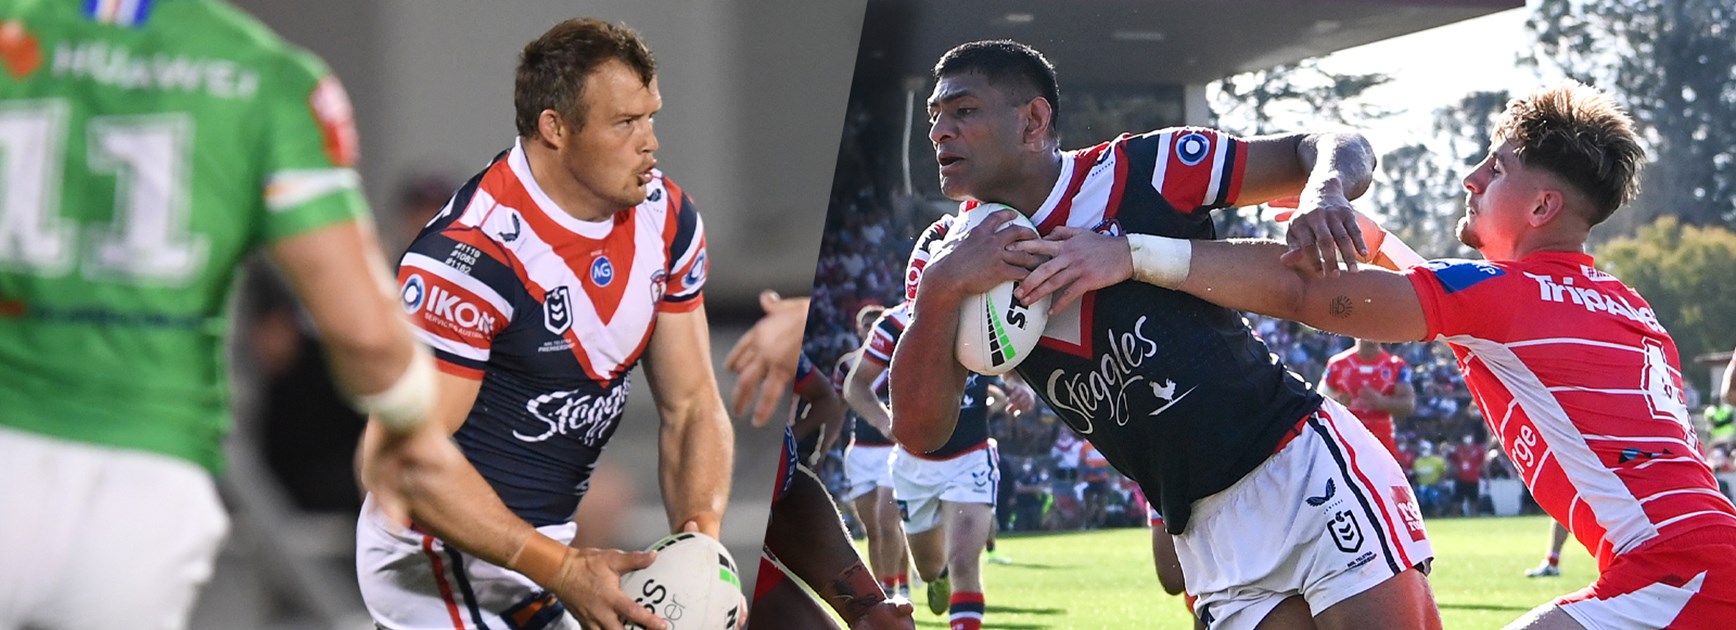 Veteran Duo Looking to Create Further History in 2021 Finals